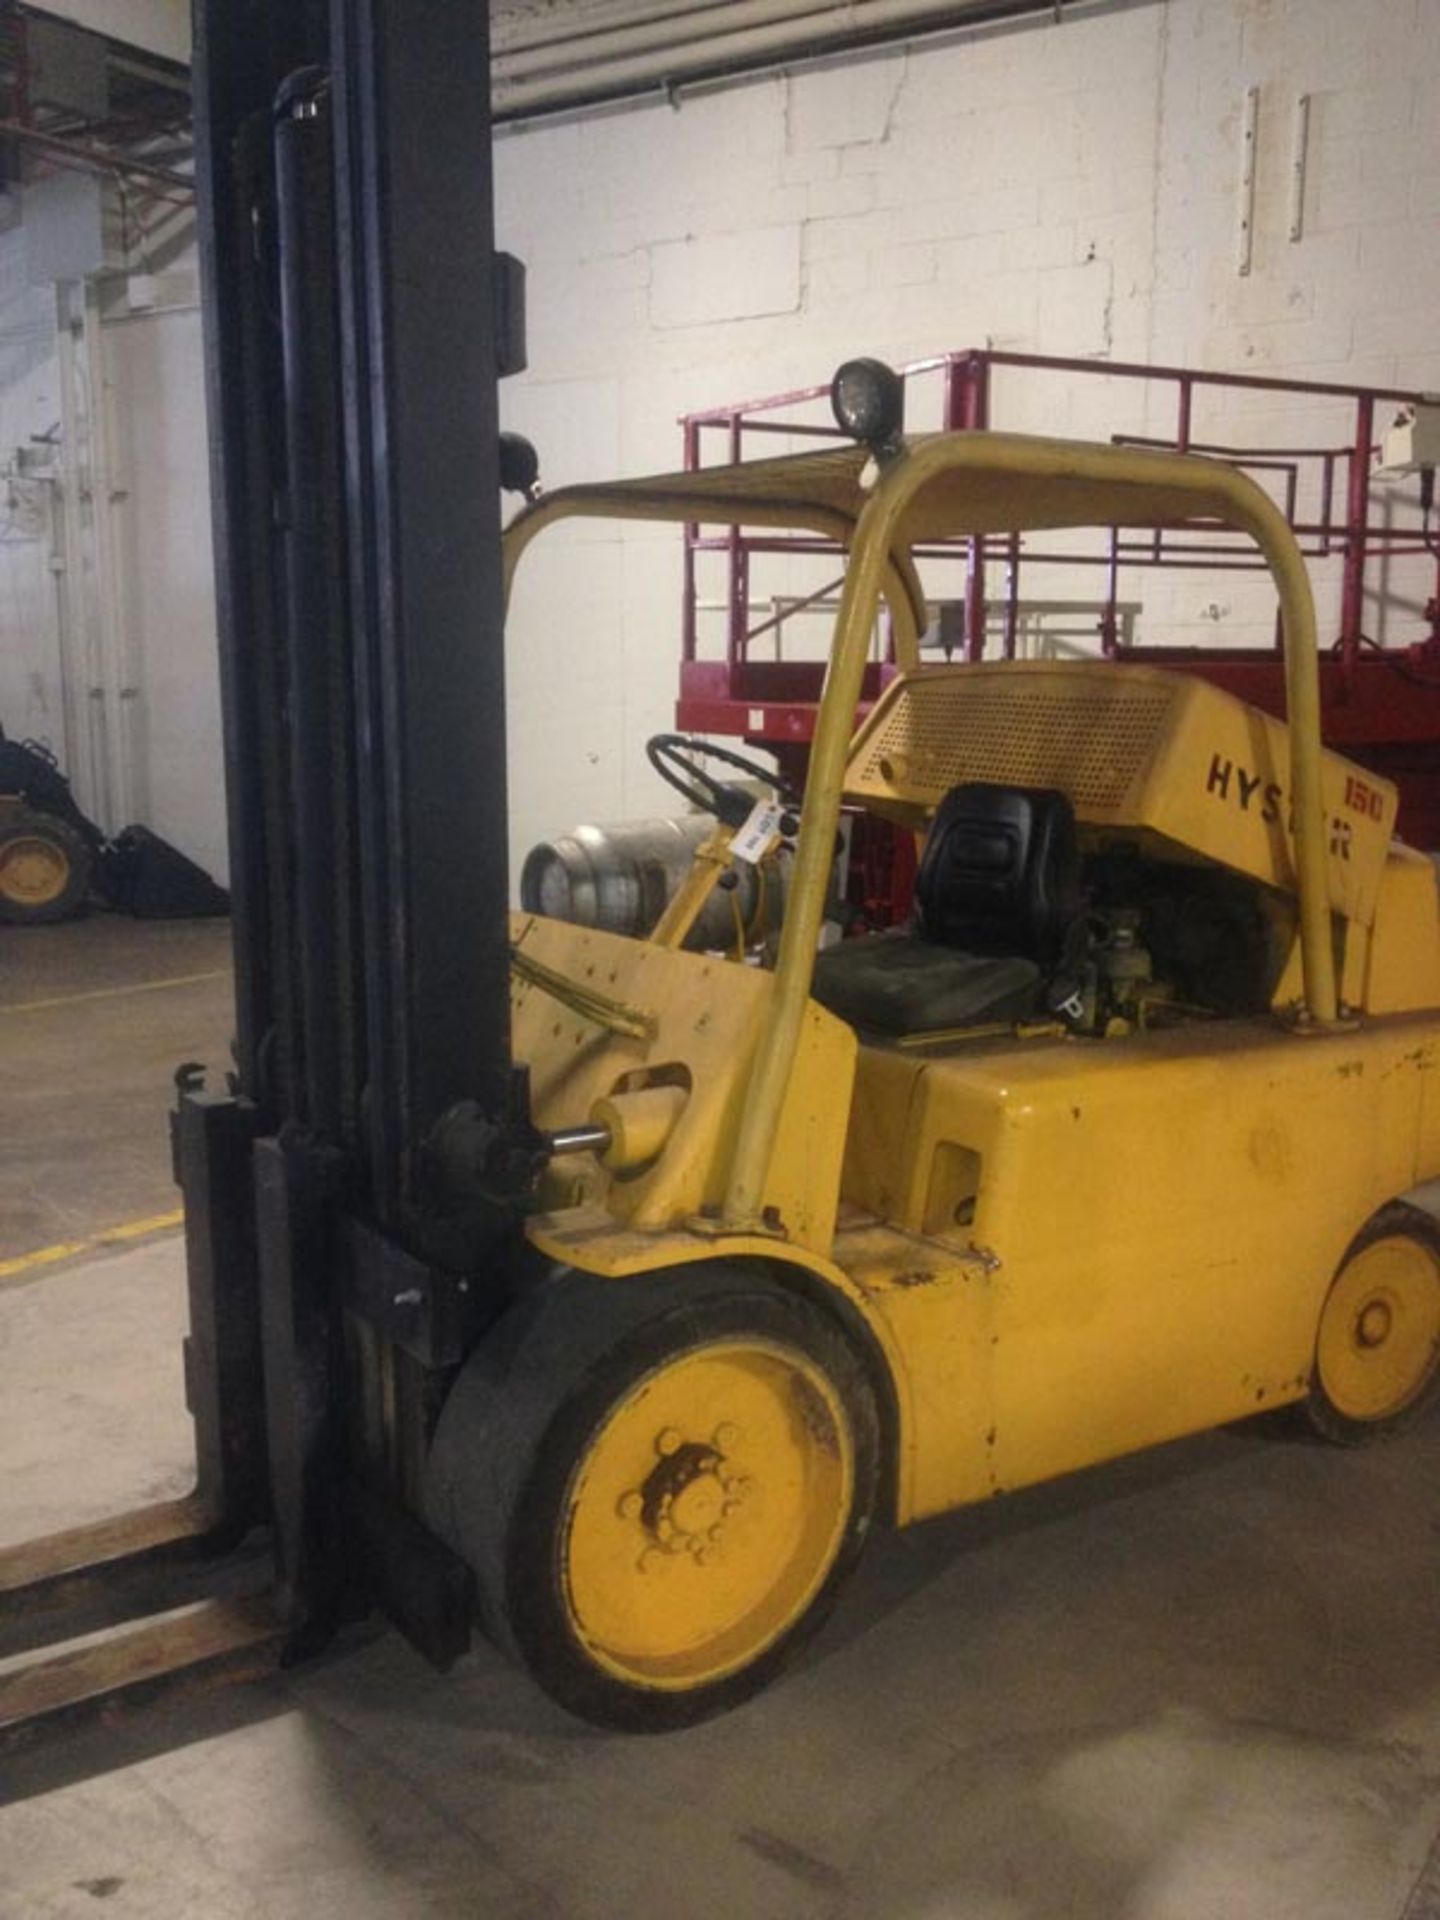 HYSTER 15,000 LB CAPACITY MODEL S150 PROPANE FORKLIFT. 60" FORKS, RUNS AND OPERATES